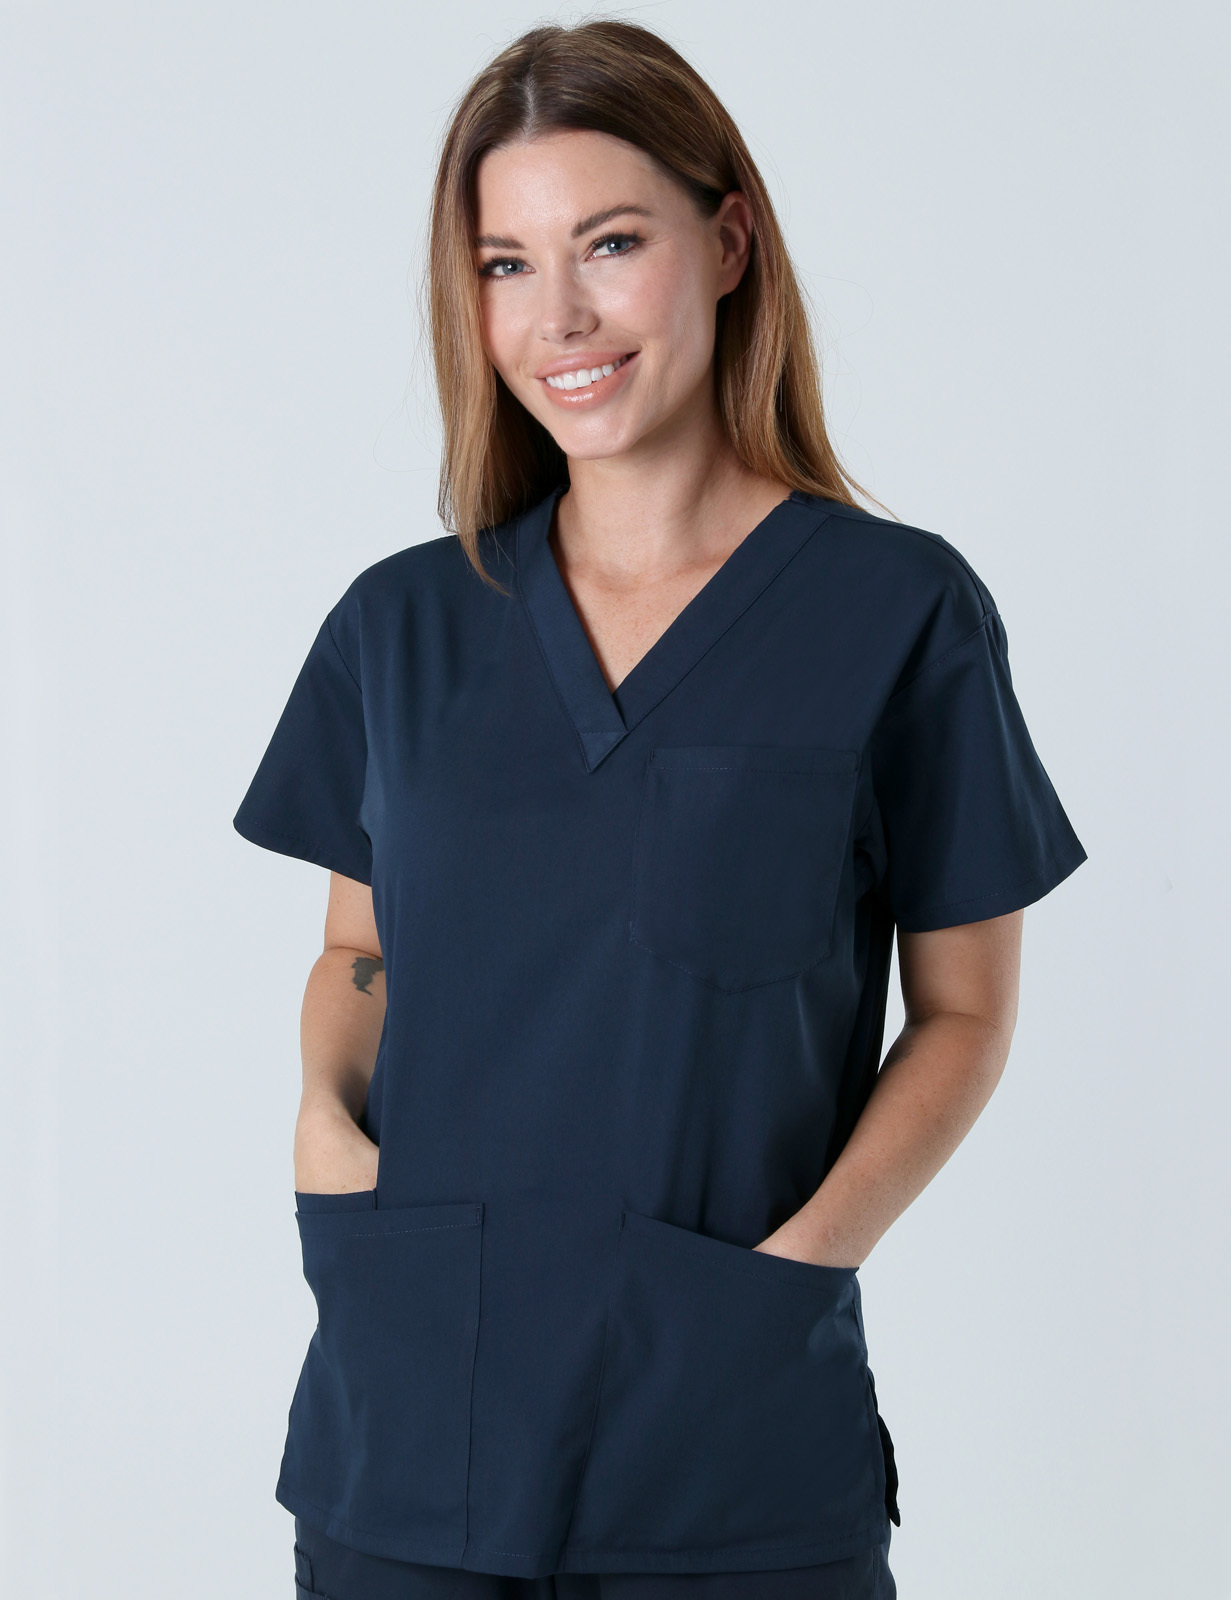 Hobart Private Hospital - Emergency Department (4 Pocket Scrub Top and Cargo Pants in Navy incl Logos)